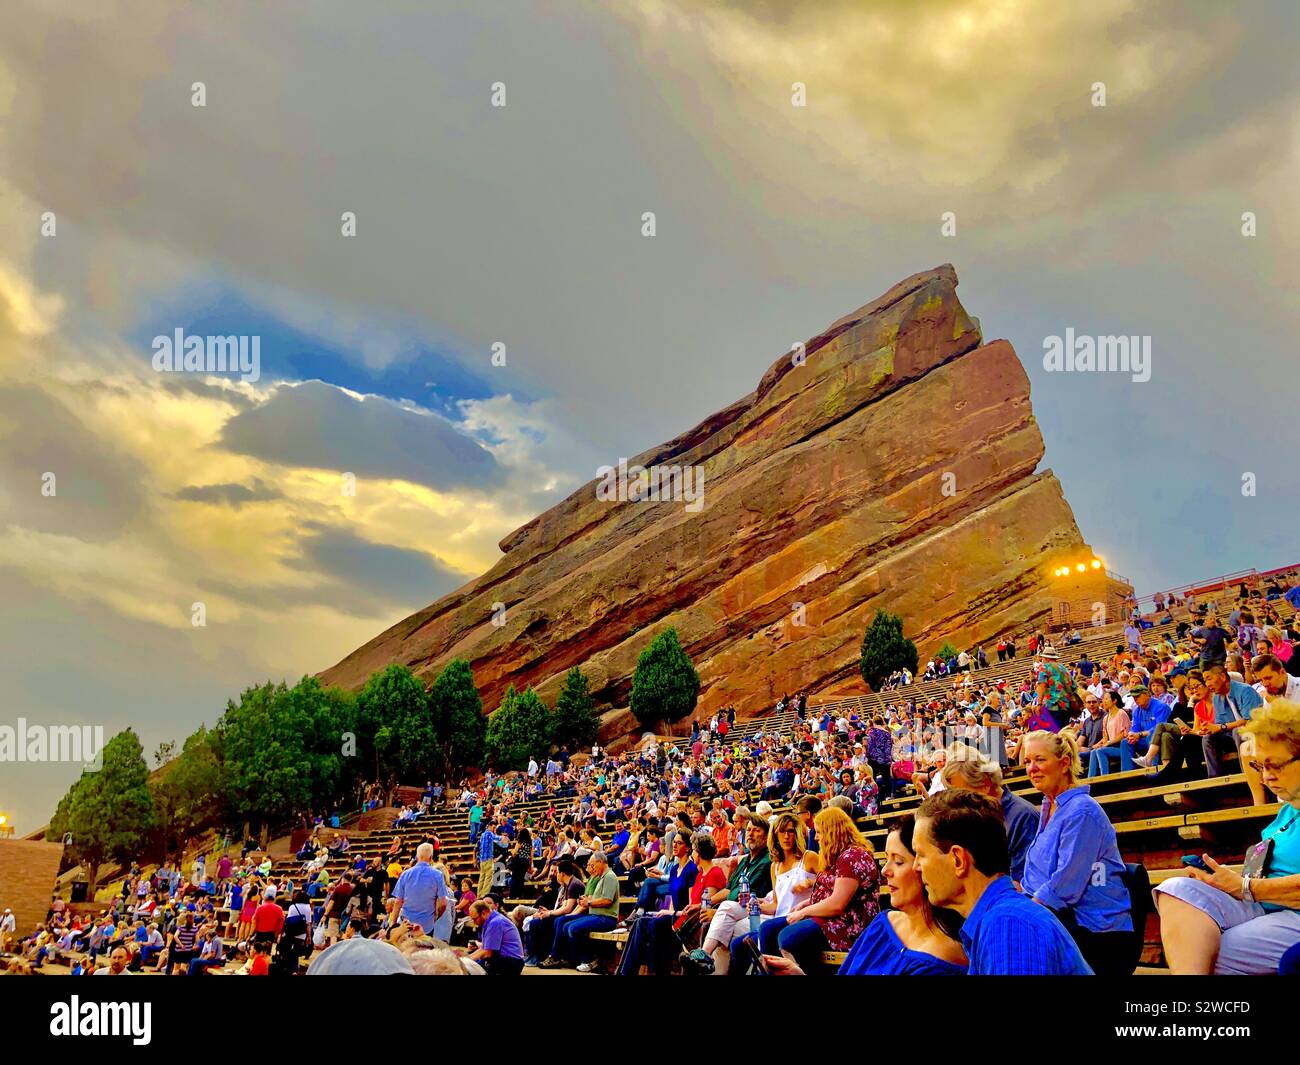 The crowd at a Red Rocks Amphitheater Colorado Stock Photo